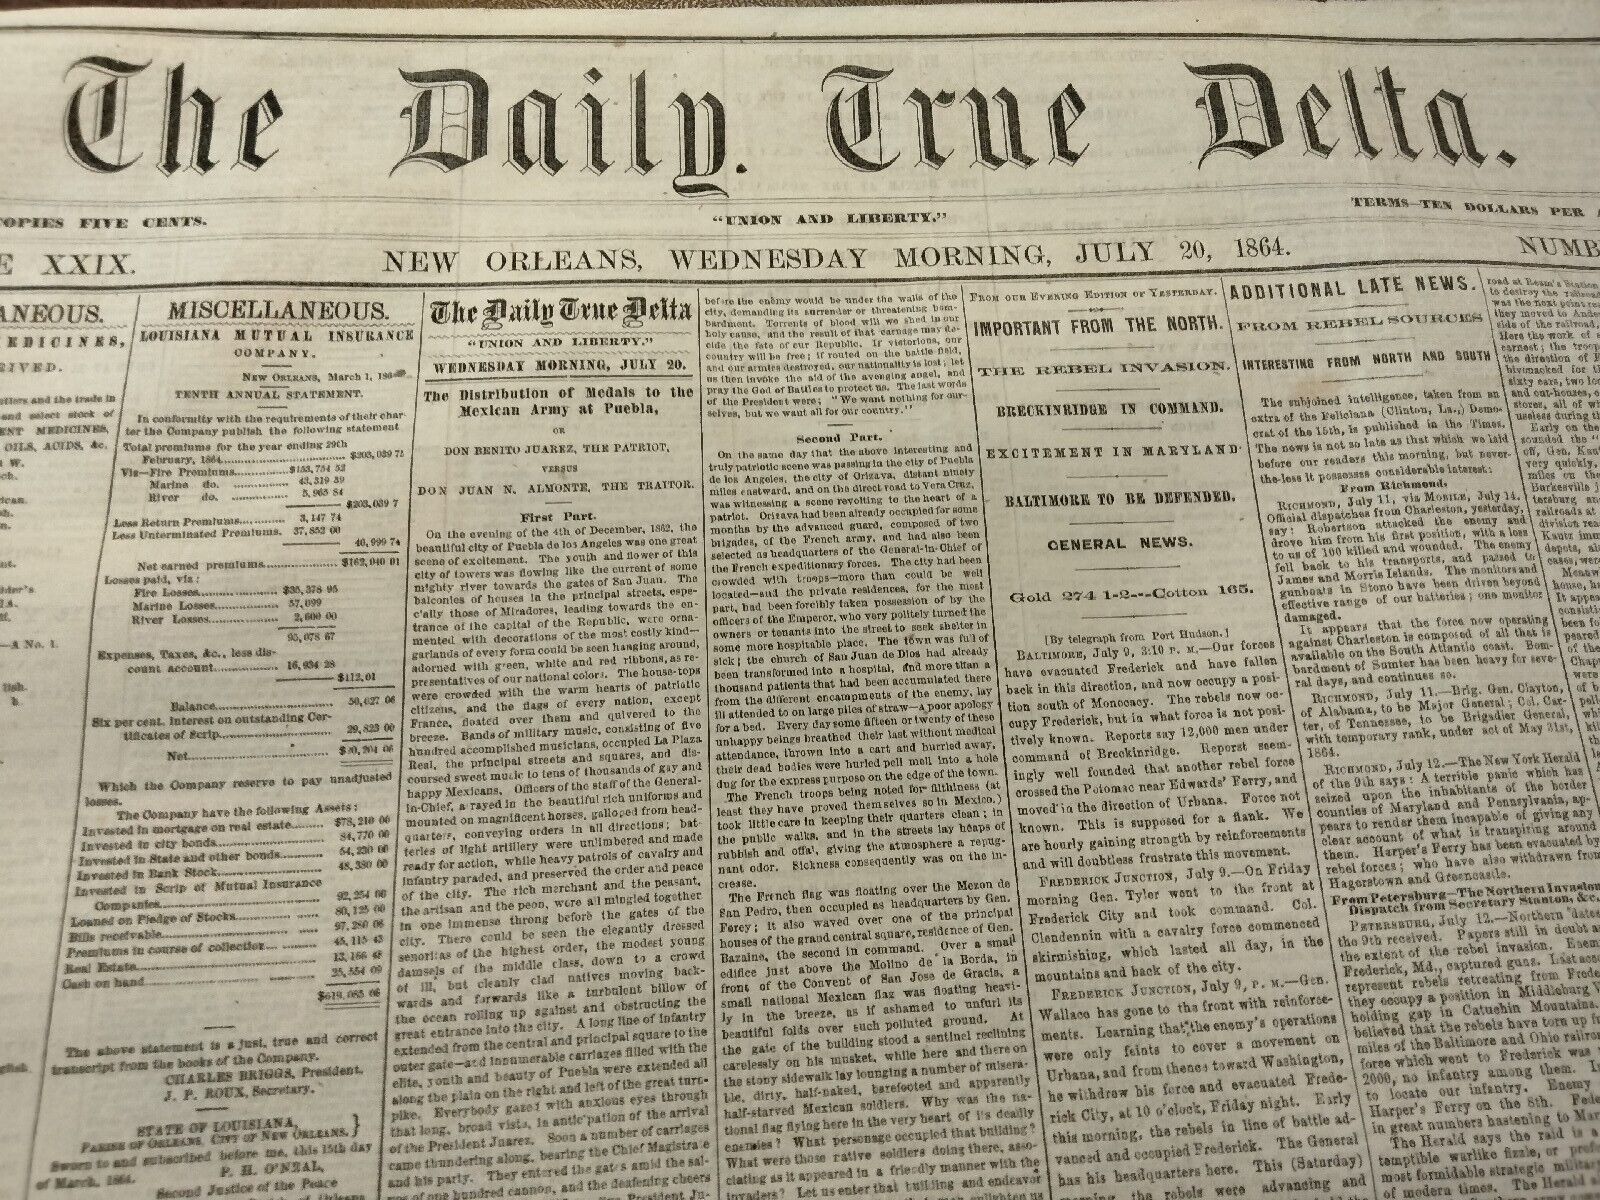 Civil War Newspapers-THE REBEL INVASION OF THE NORTH, BATTLE ON THE MONOCACY